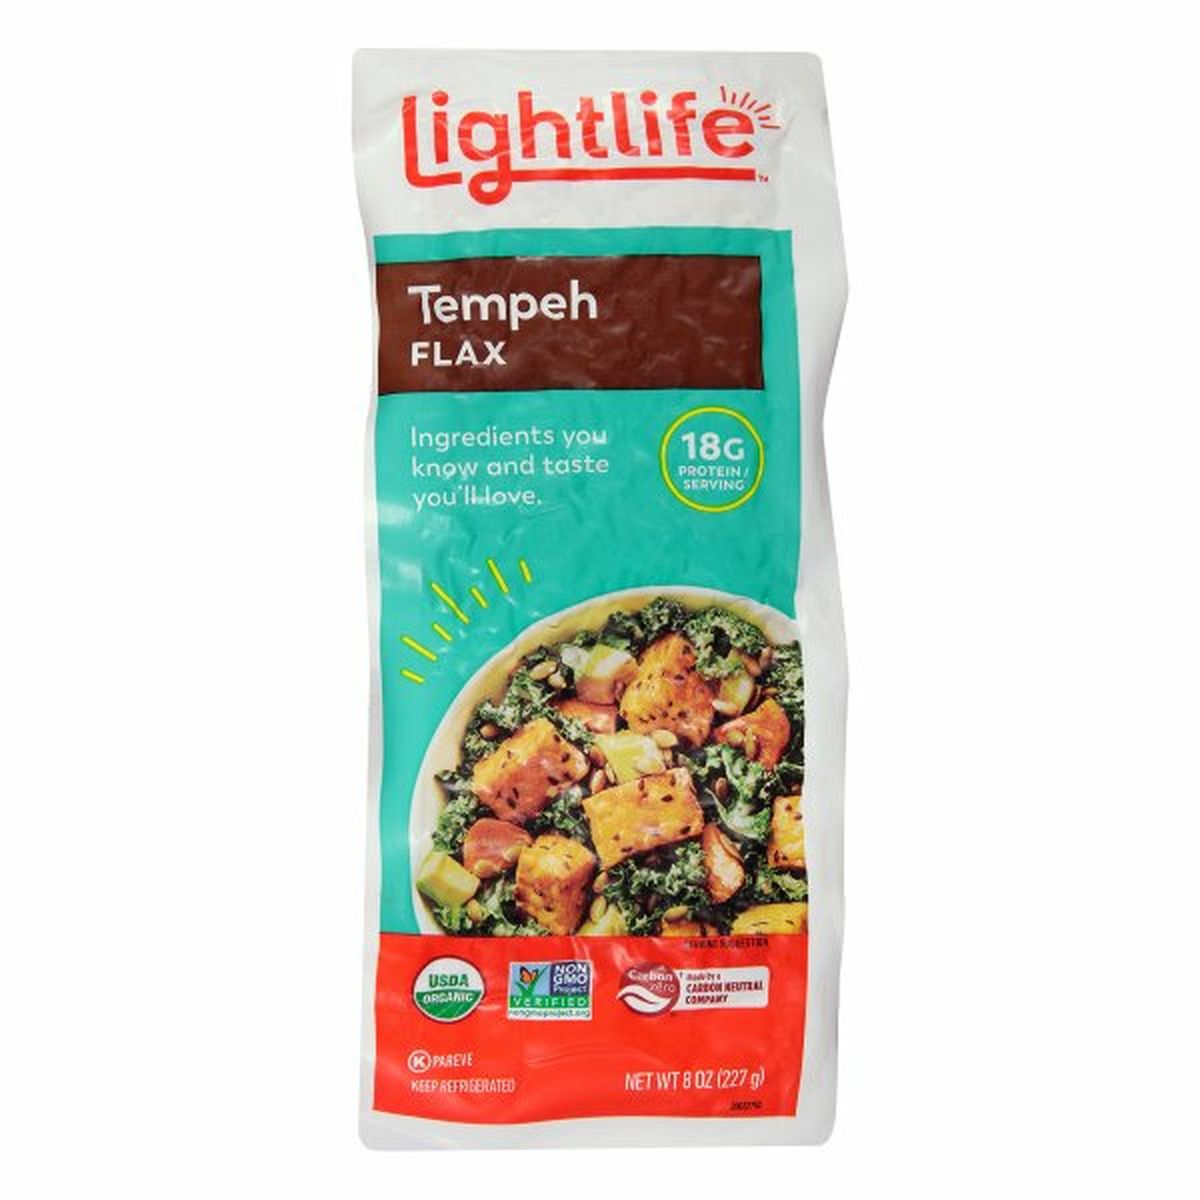 Calories in Lightlife Tempeh, Flax